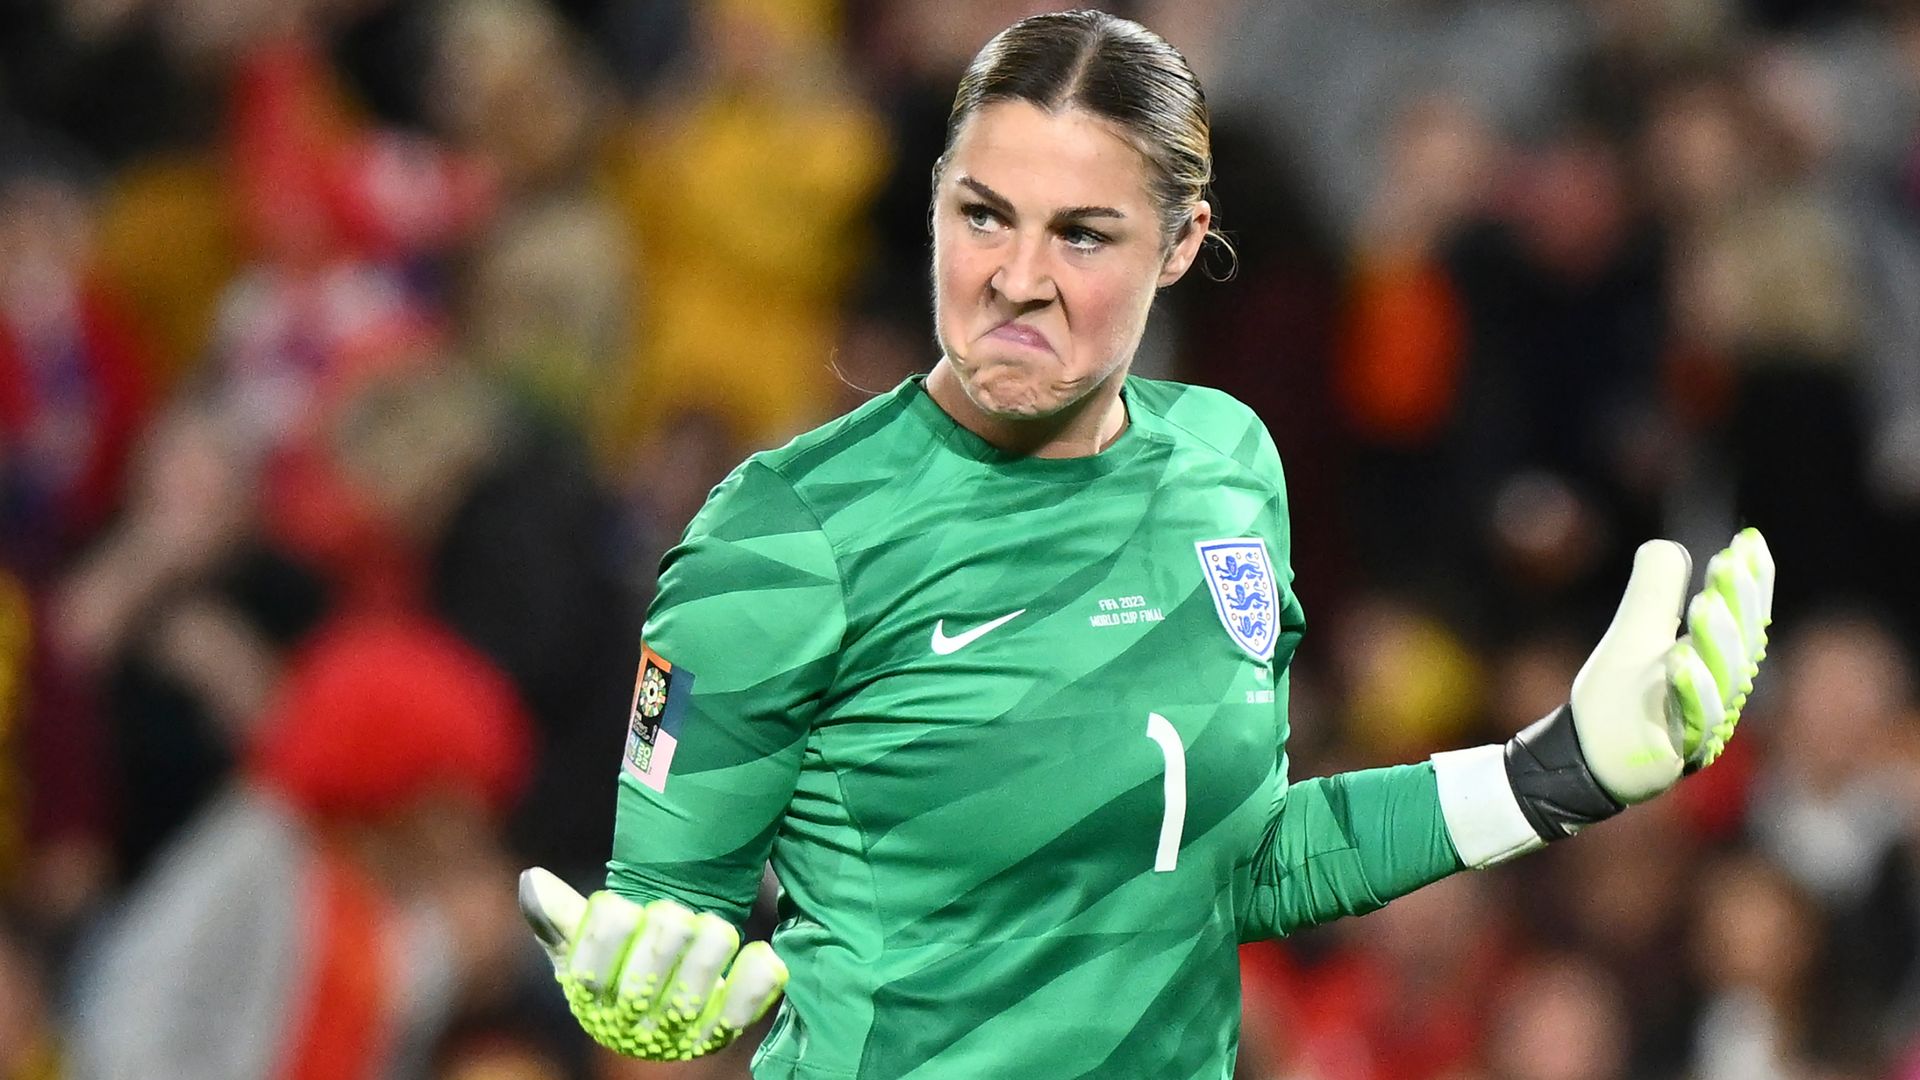 Earps' England goalkeeper shirts sell out within hours of going on sale